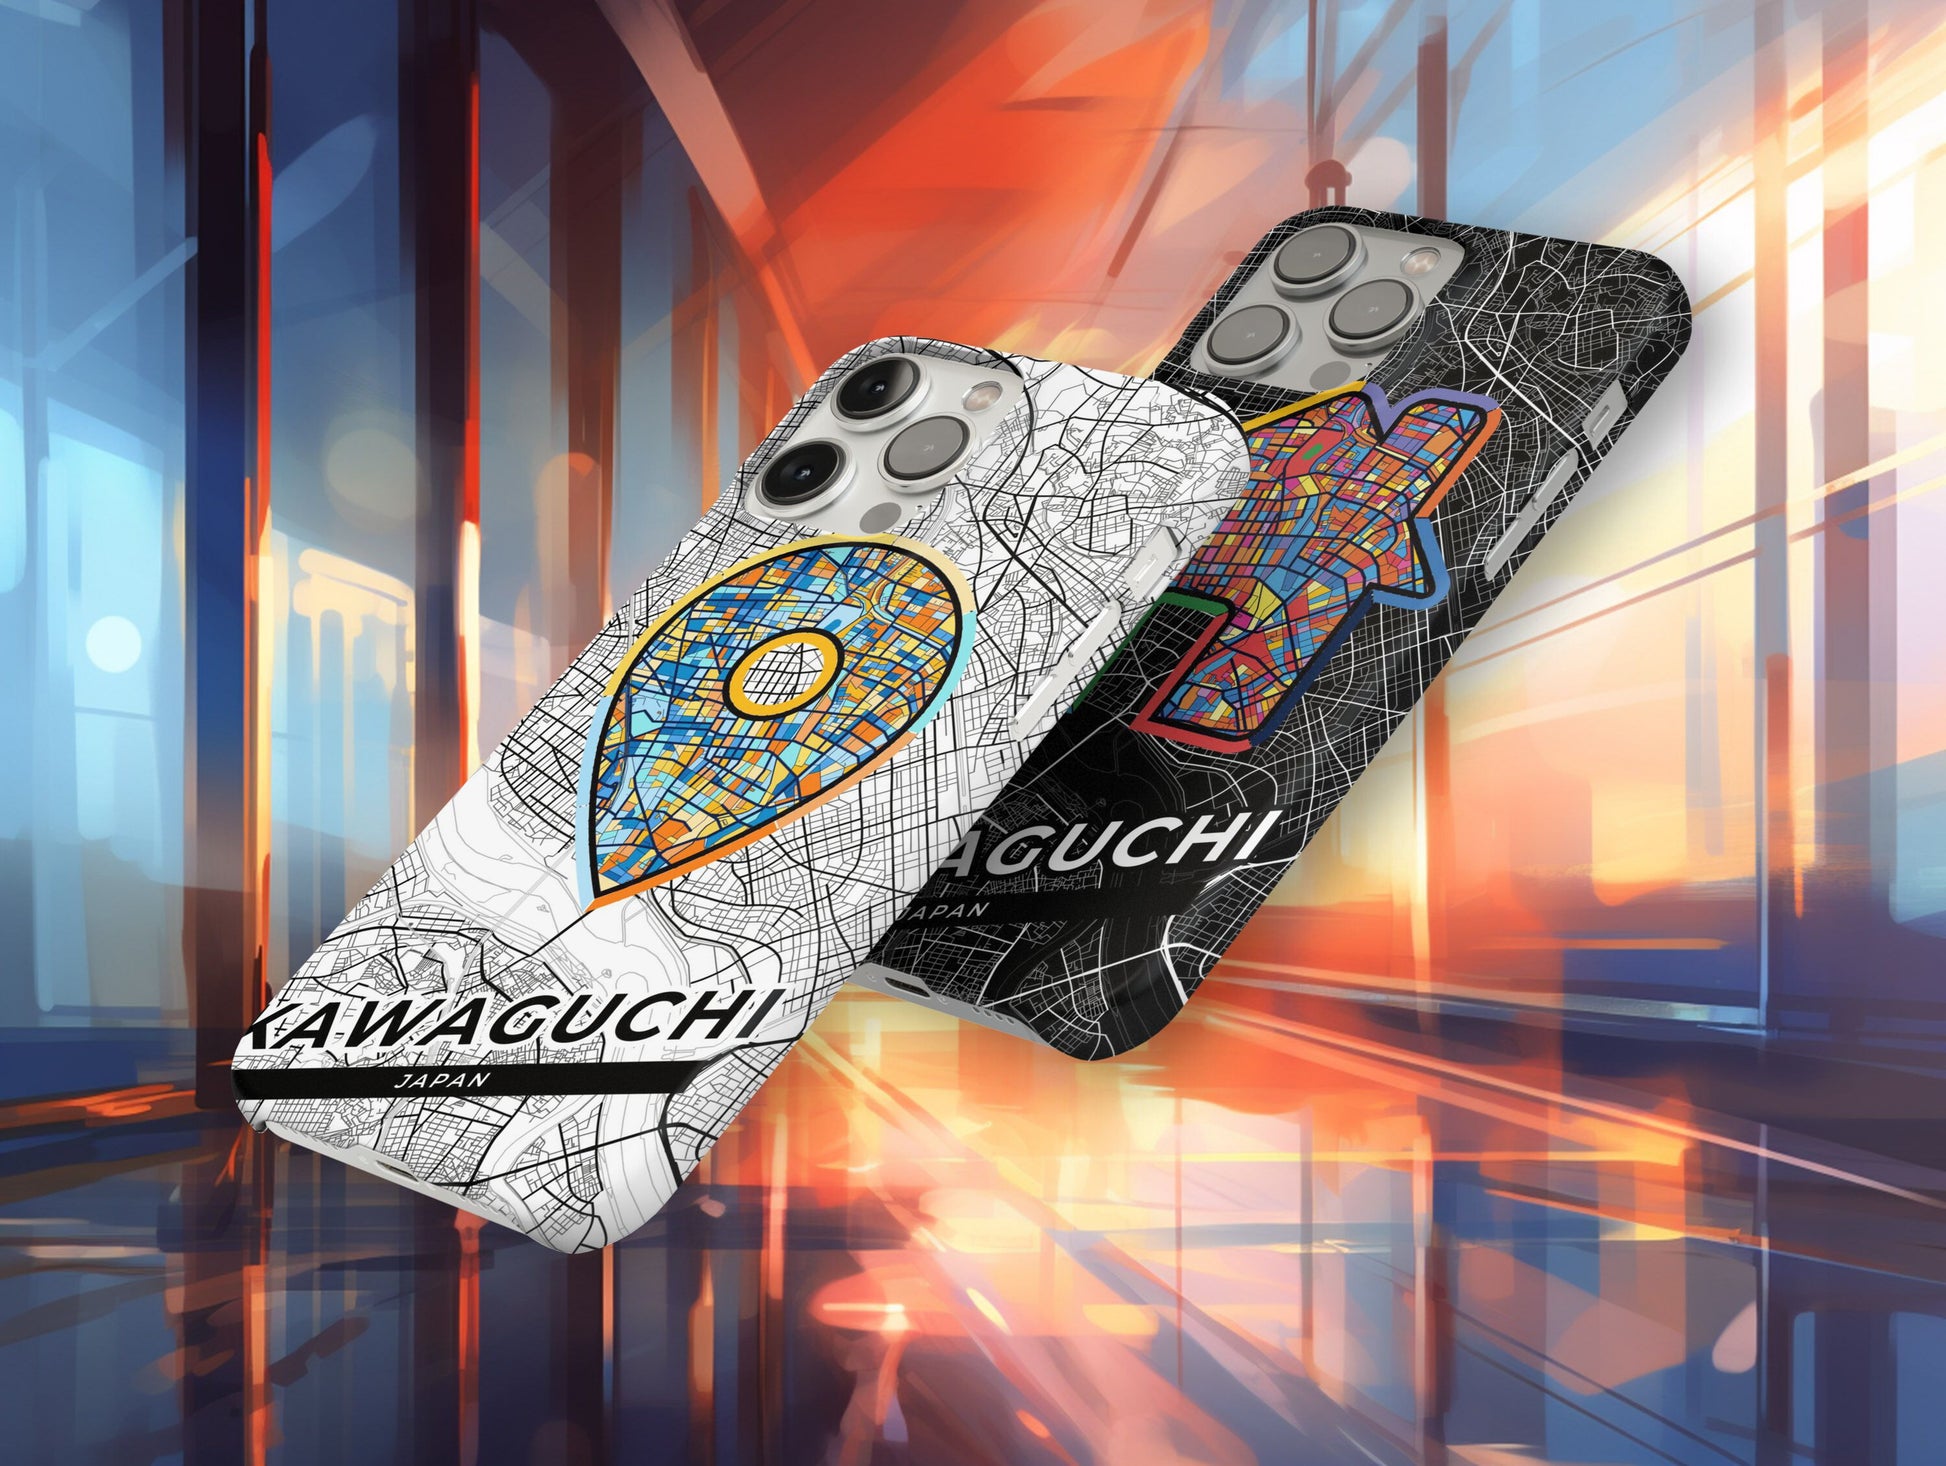 Kawaguchi Japan slim phone case with colorful icon. Birthday, wedding or housewarming gift. Couple match cases.